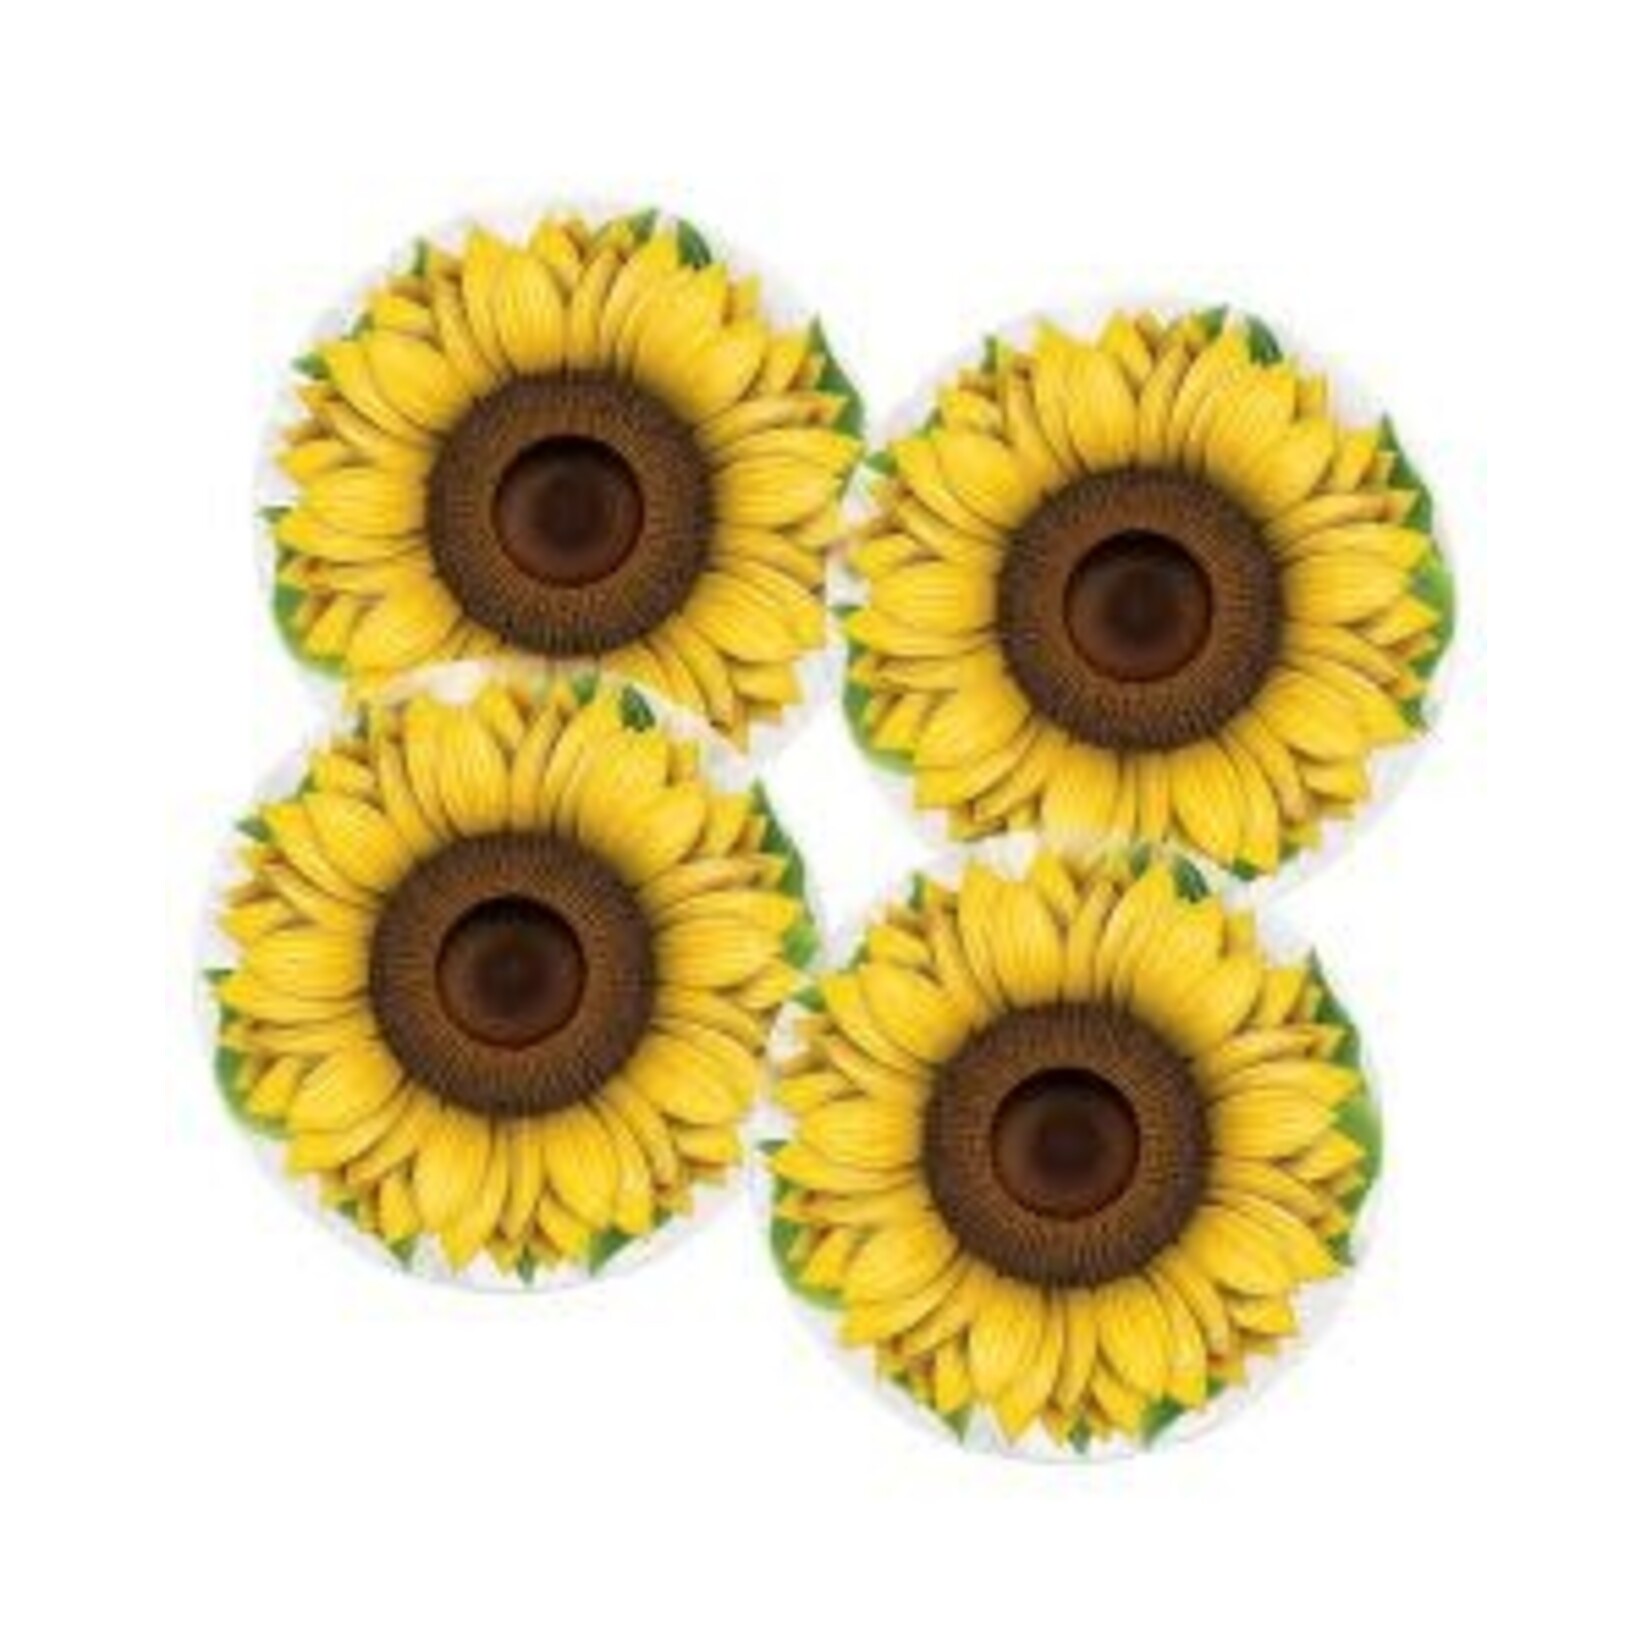 Beistle 13" Sunflower Plastic Placemats - 4ct.